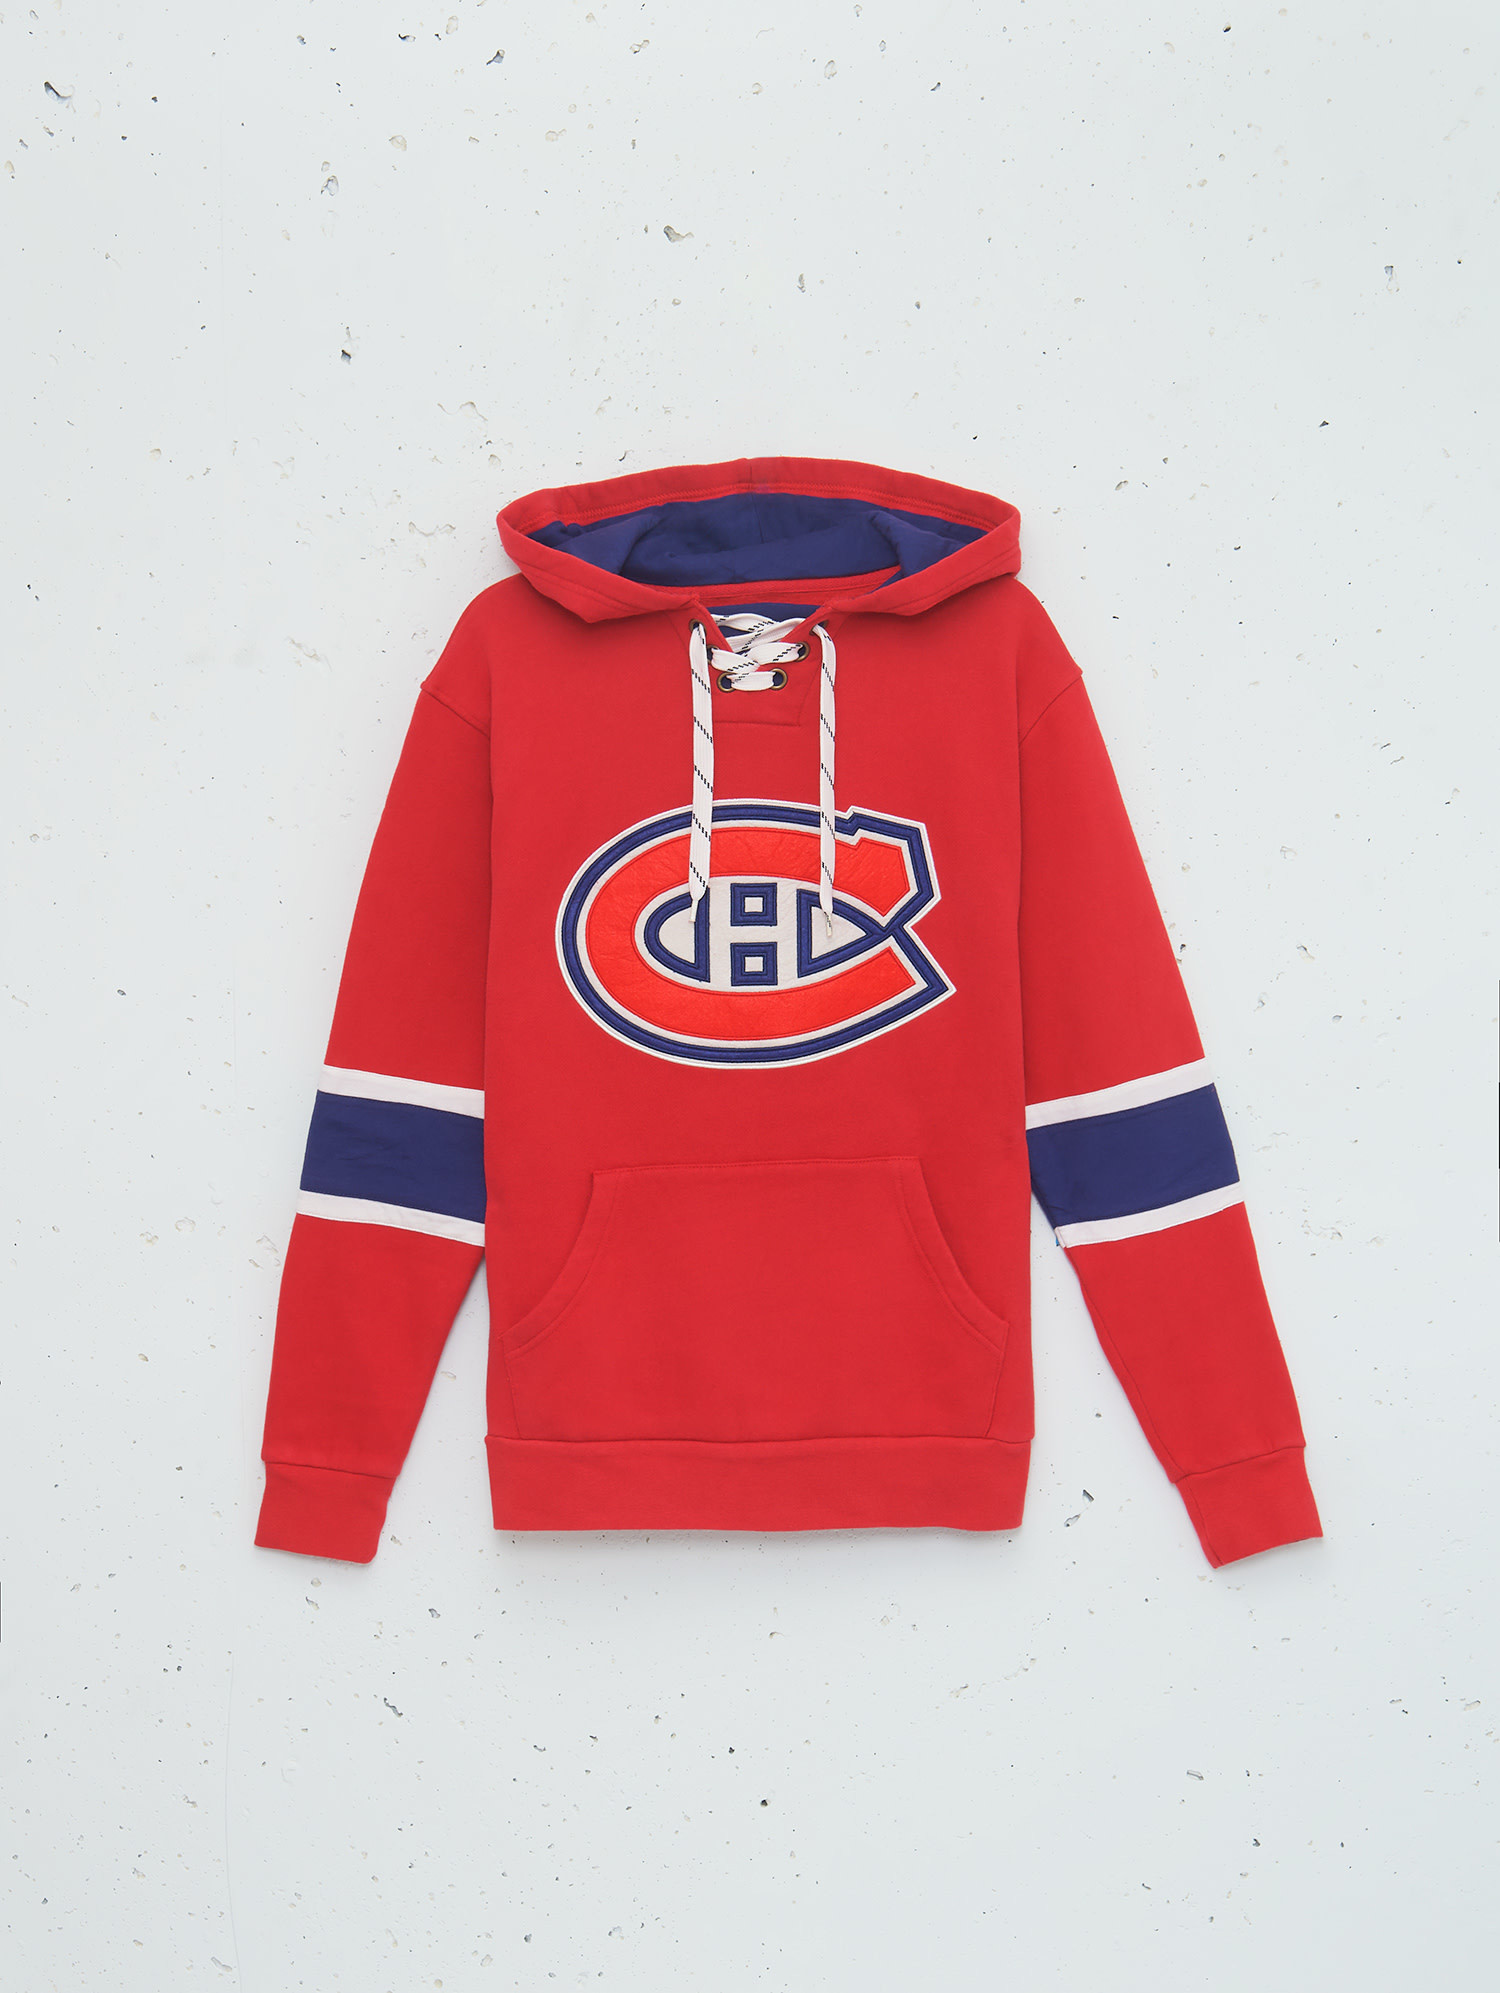 Laced Canadiens Hoodie∣ Tricolore 